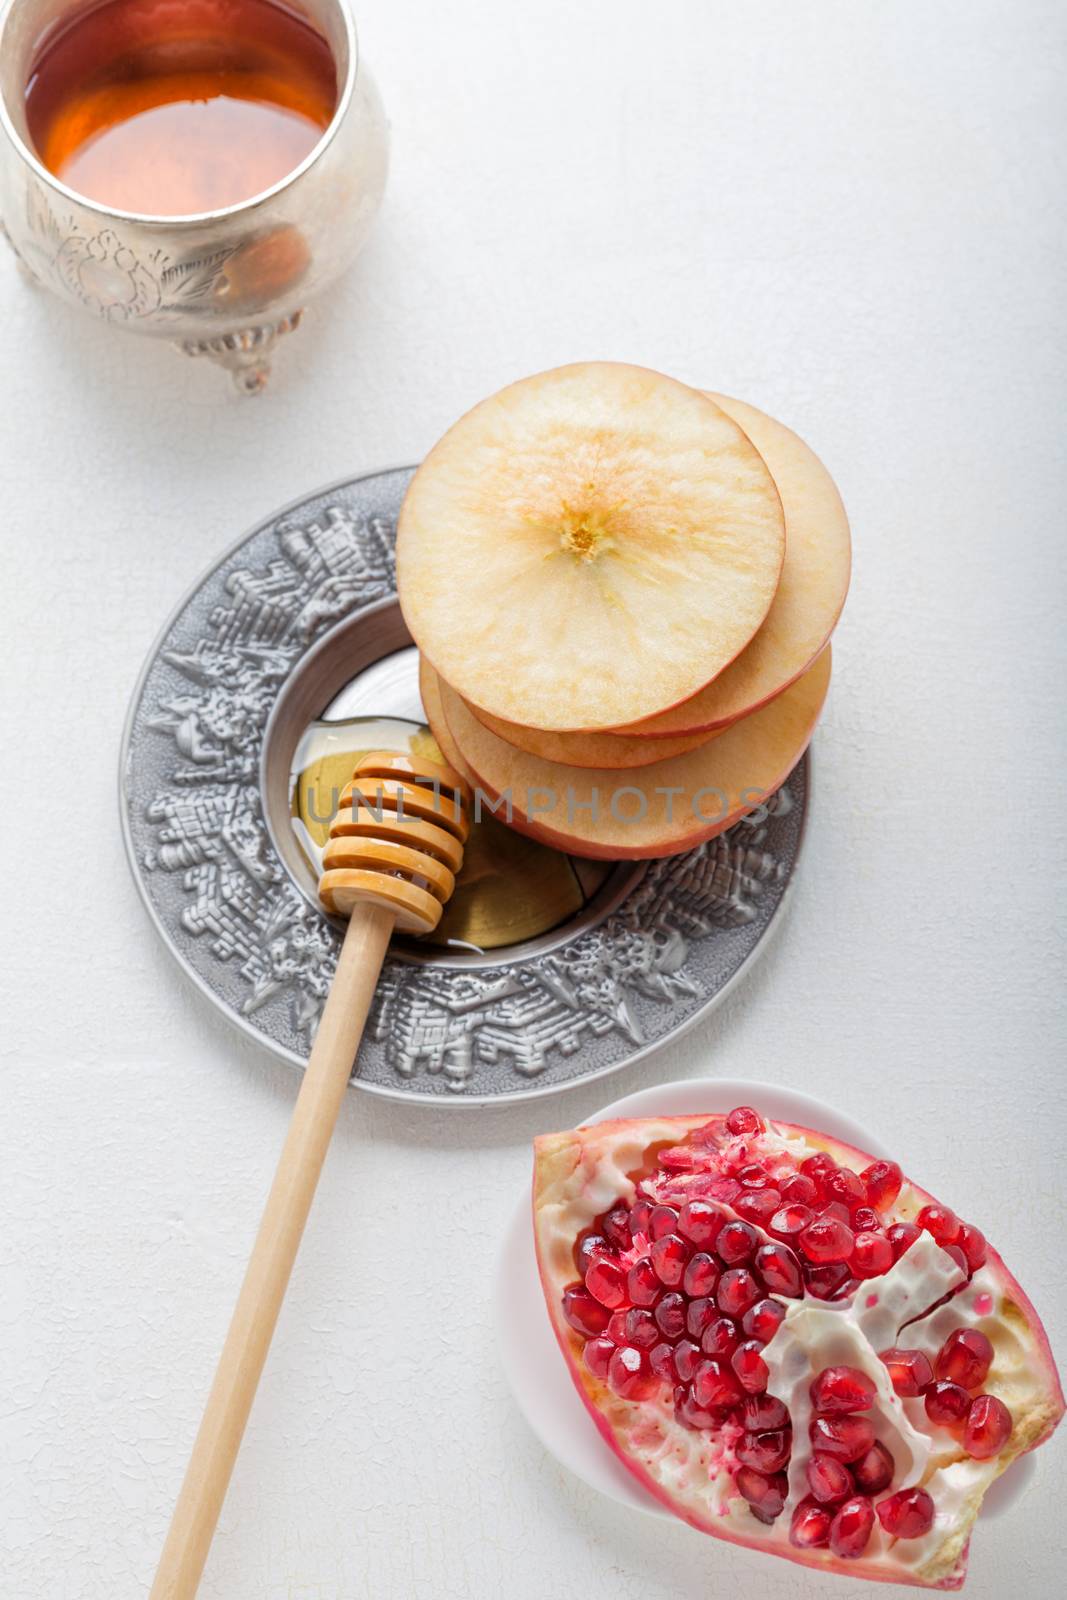 Apples, pomegranate and honey for Rosh Hashanah holiday